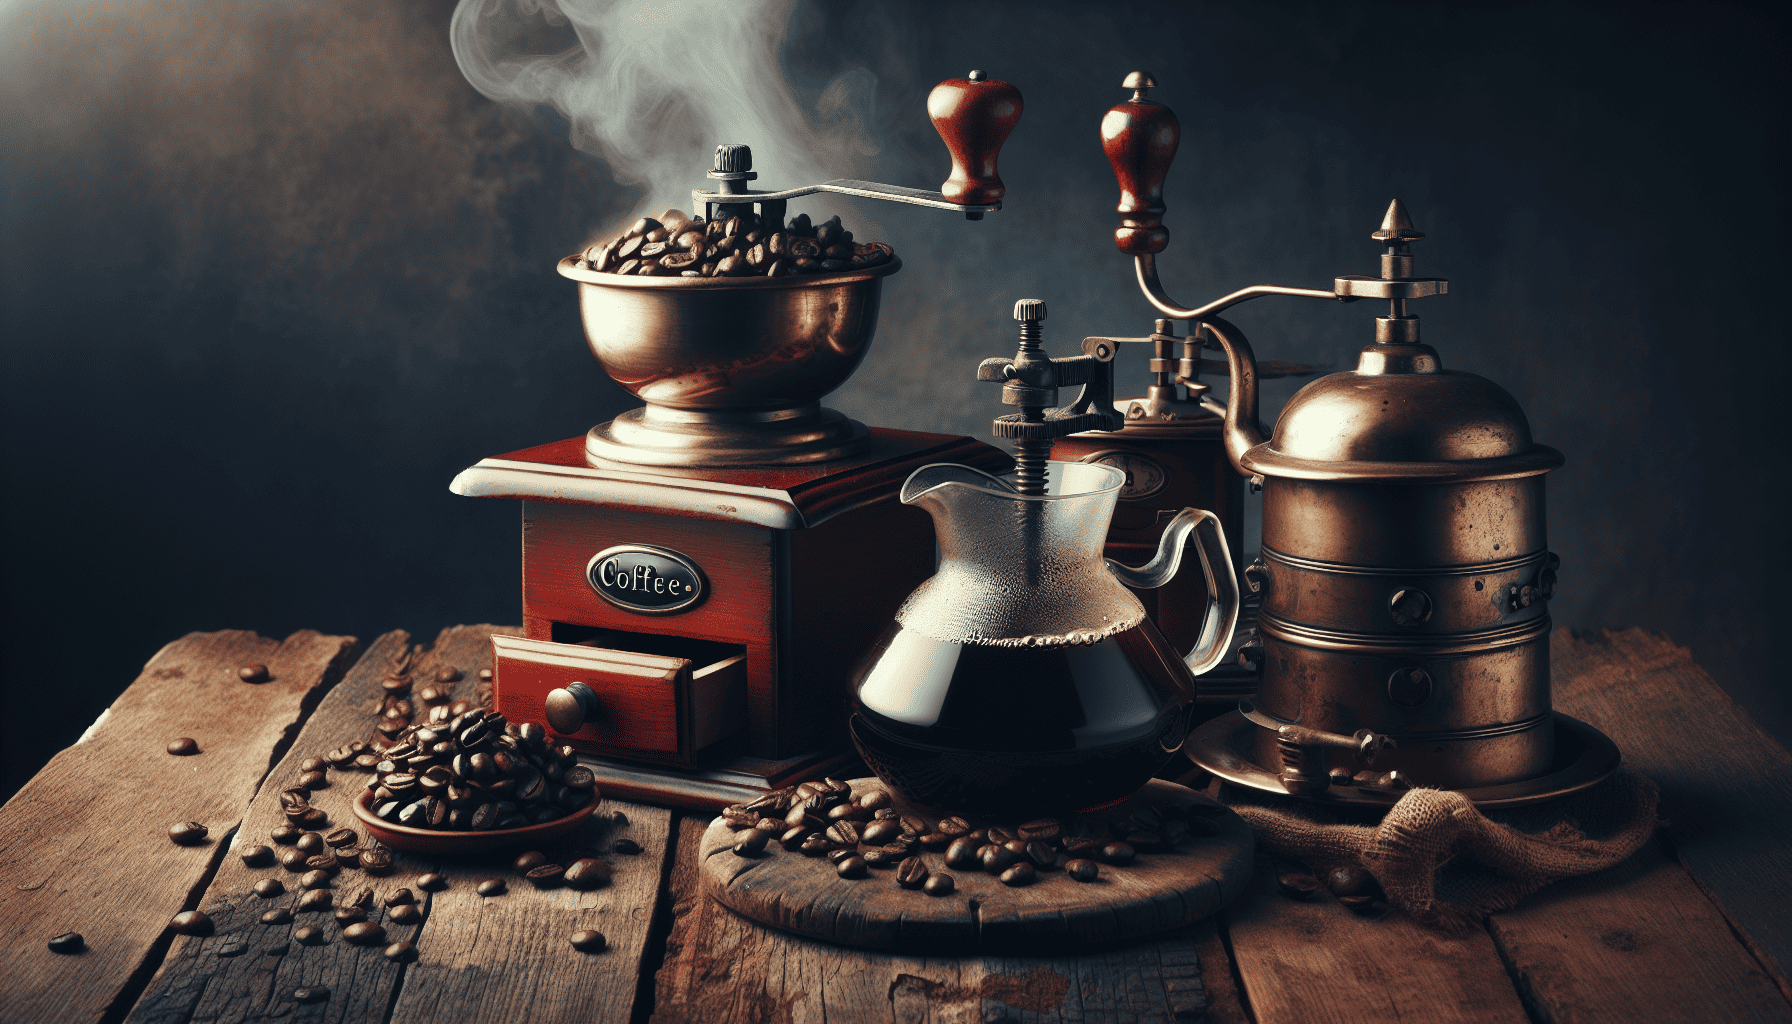 Artisan coffee beans and brewing equipment